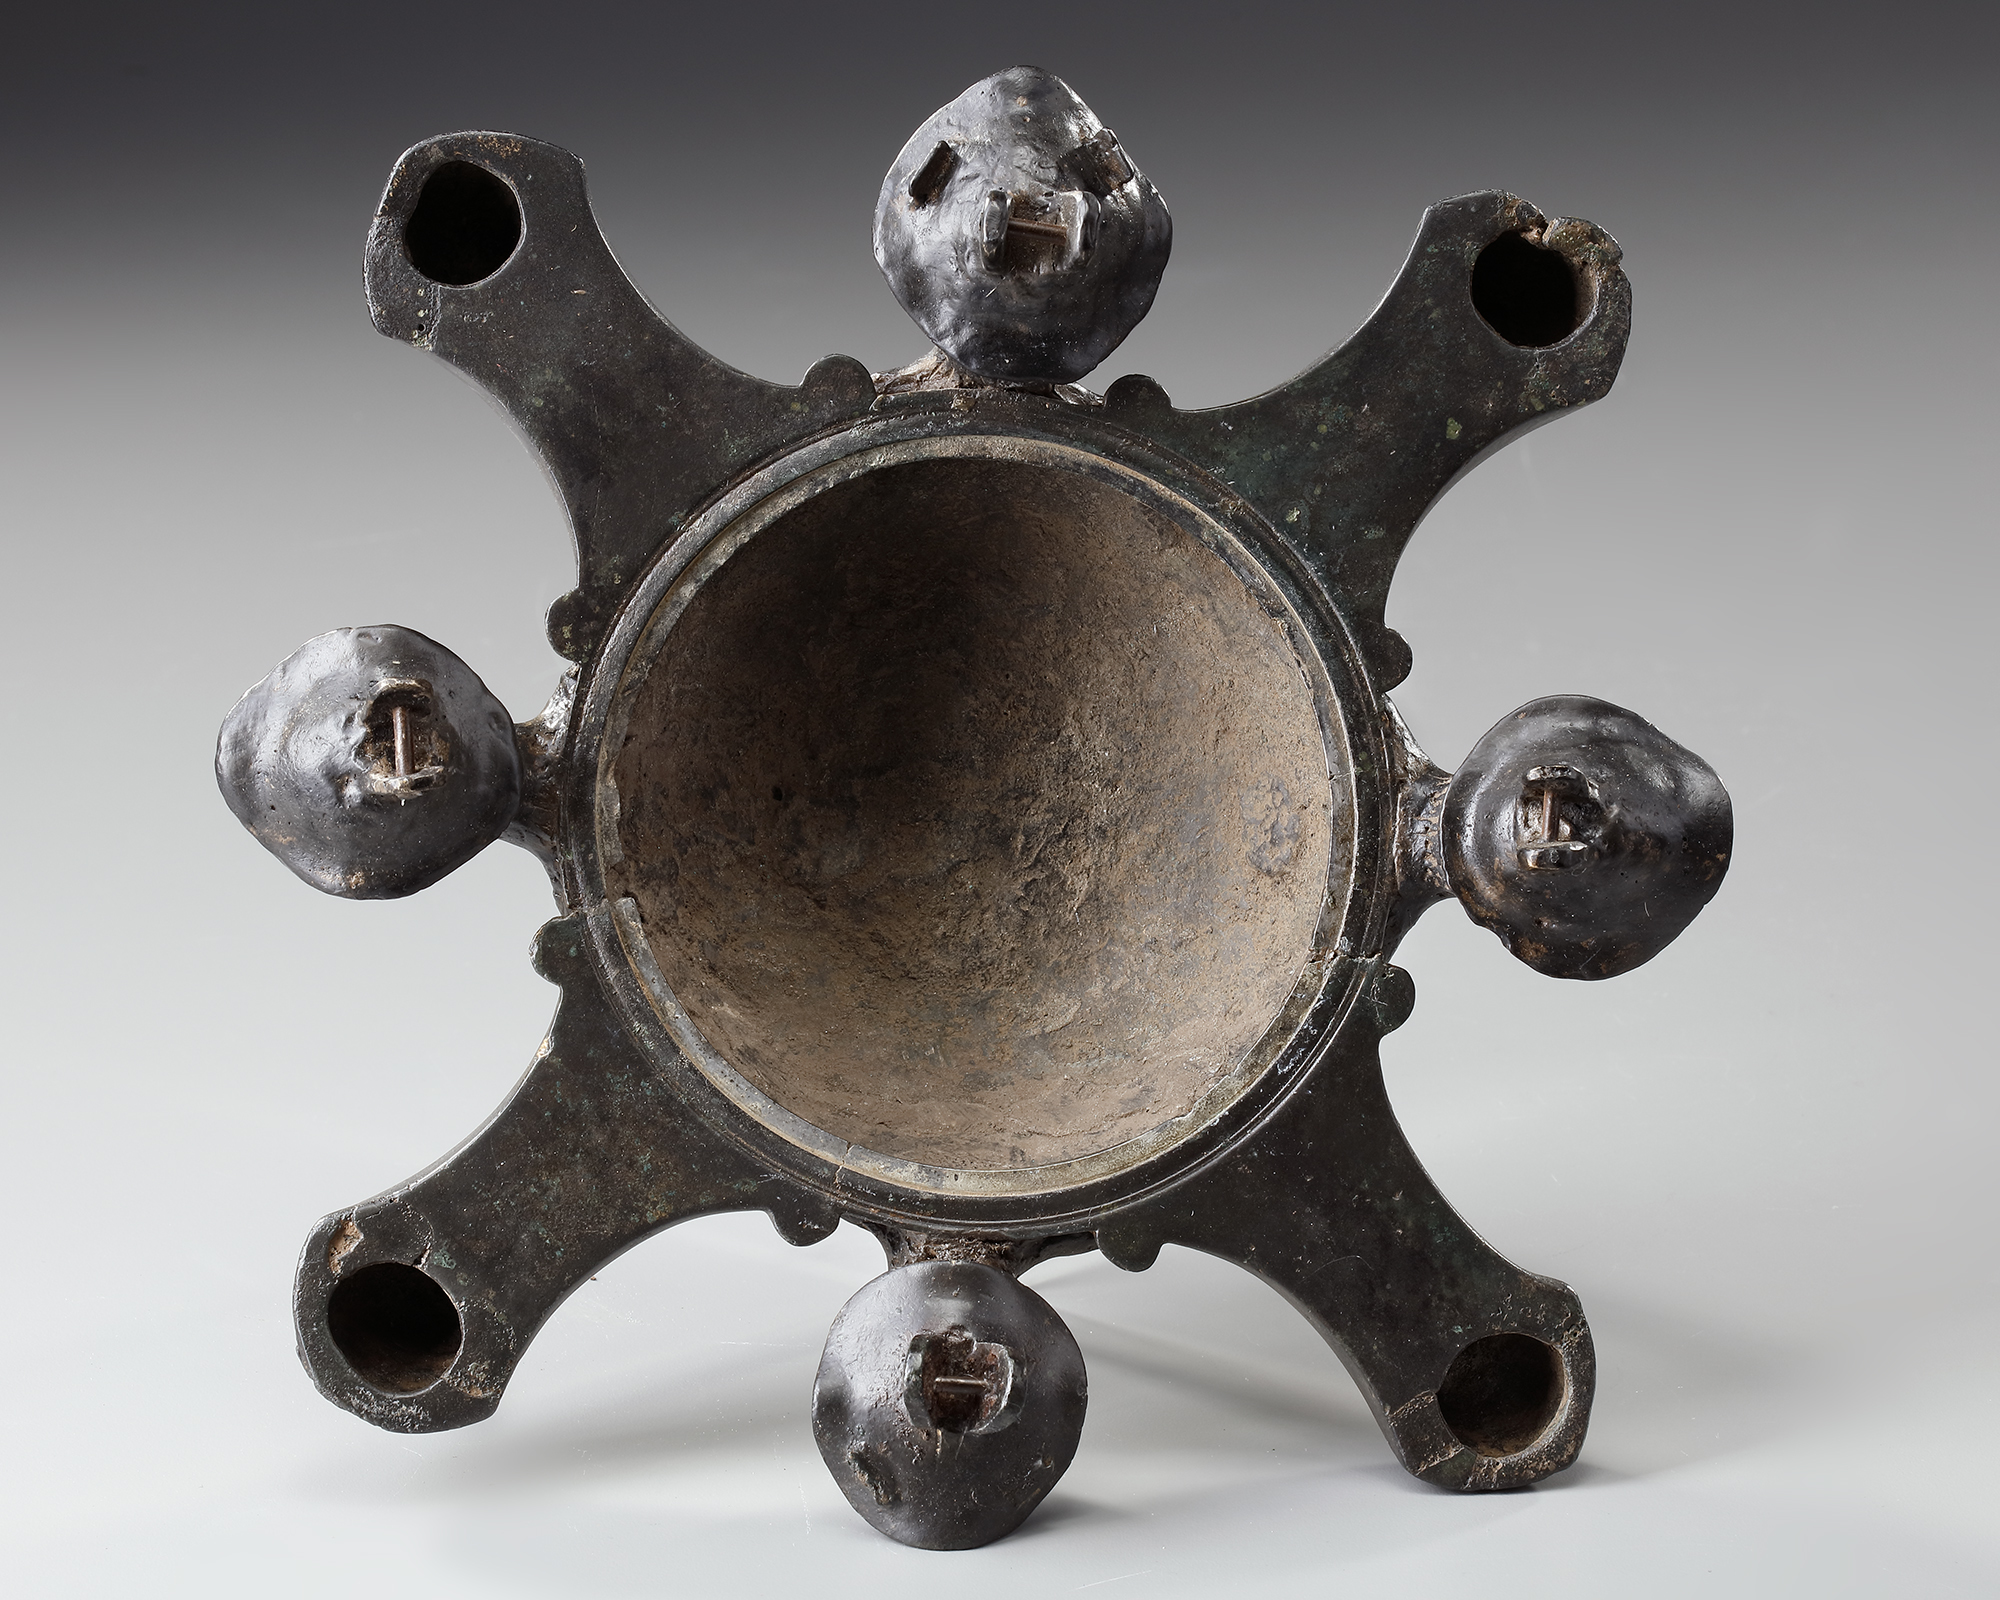 A ROMAN BRONZE OIL LAMP WITH FOUR SPOUTS AND BUSTS OF MERCURY, CIRCA 1ST-2ND CENTURY A.D - Image 4 of 5